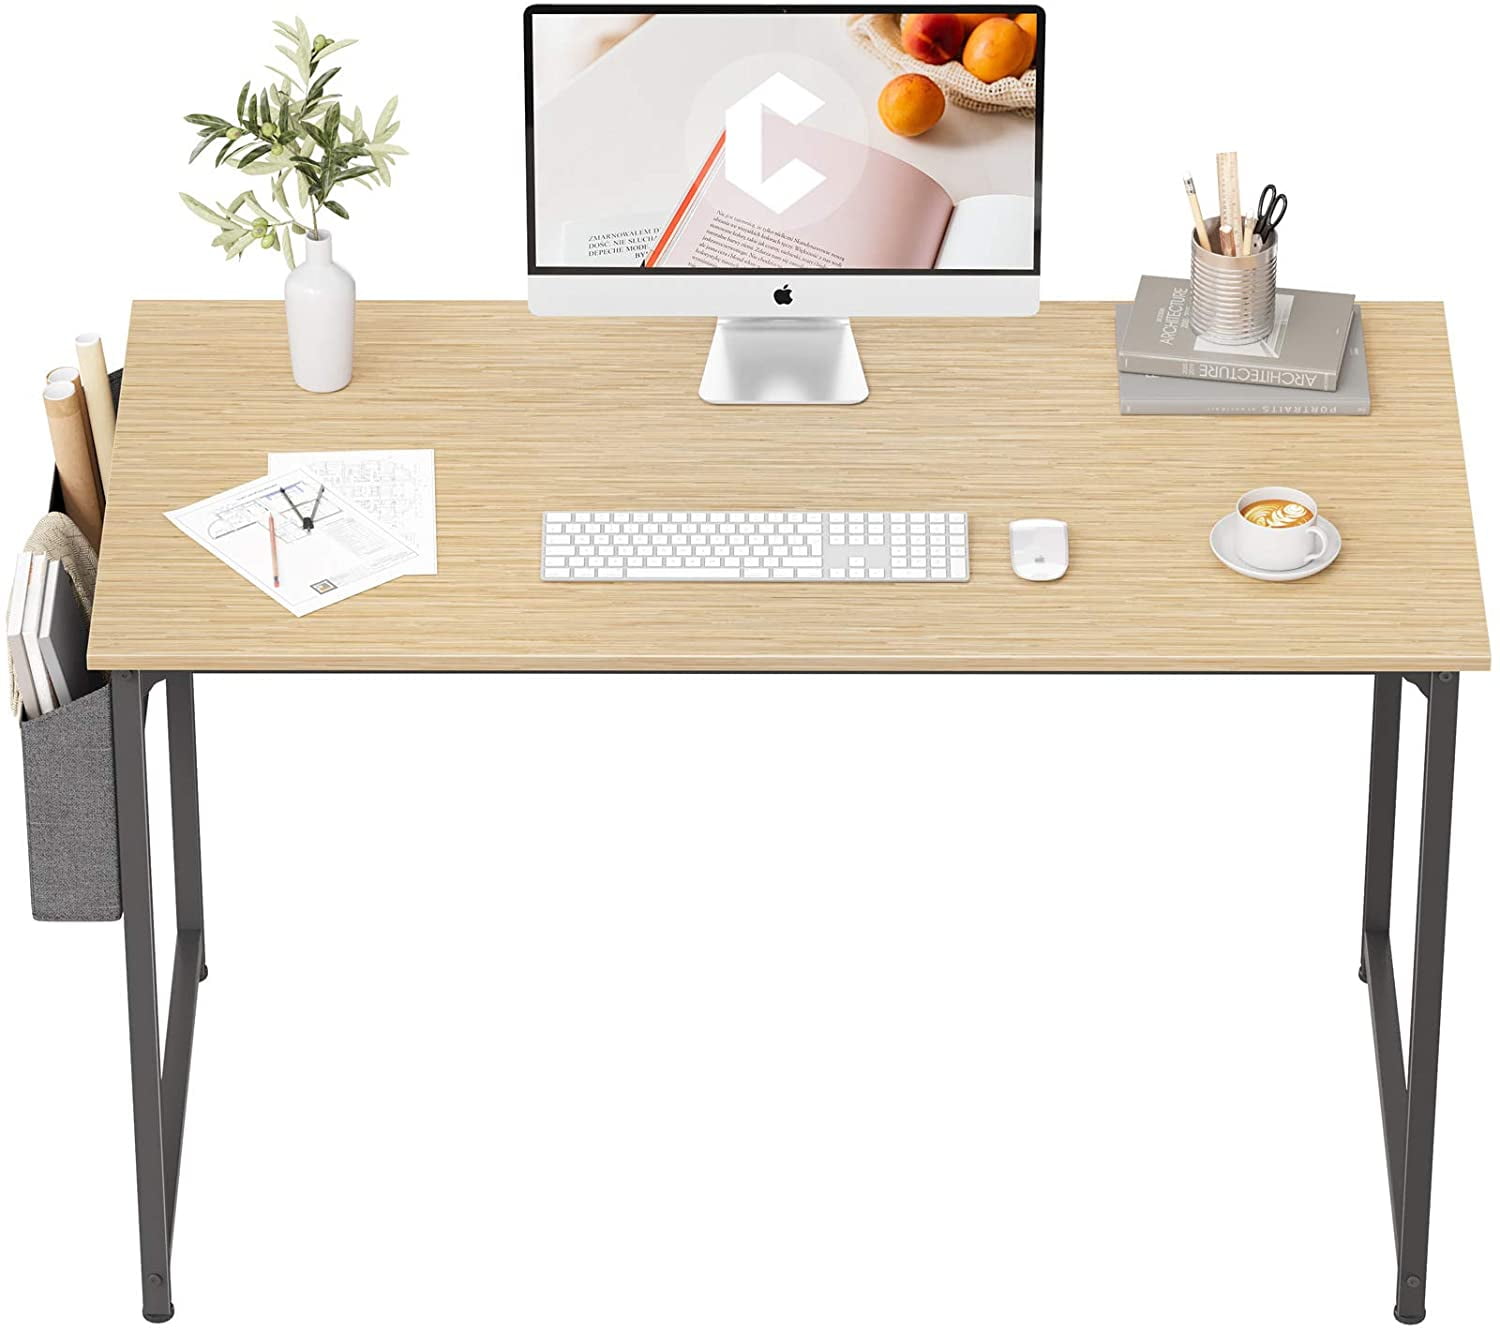 47, White Black Metal Frame Industrial Style PC Desk Tayene Computer Desk Study Writing Table for Home Office 